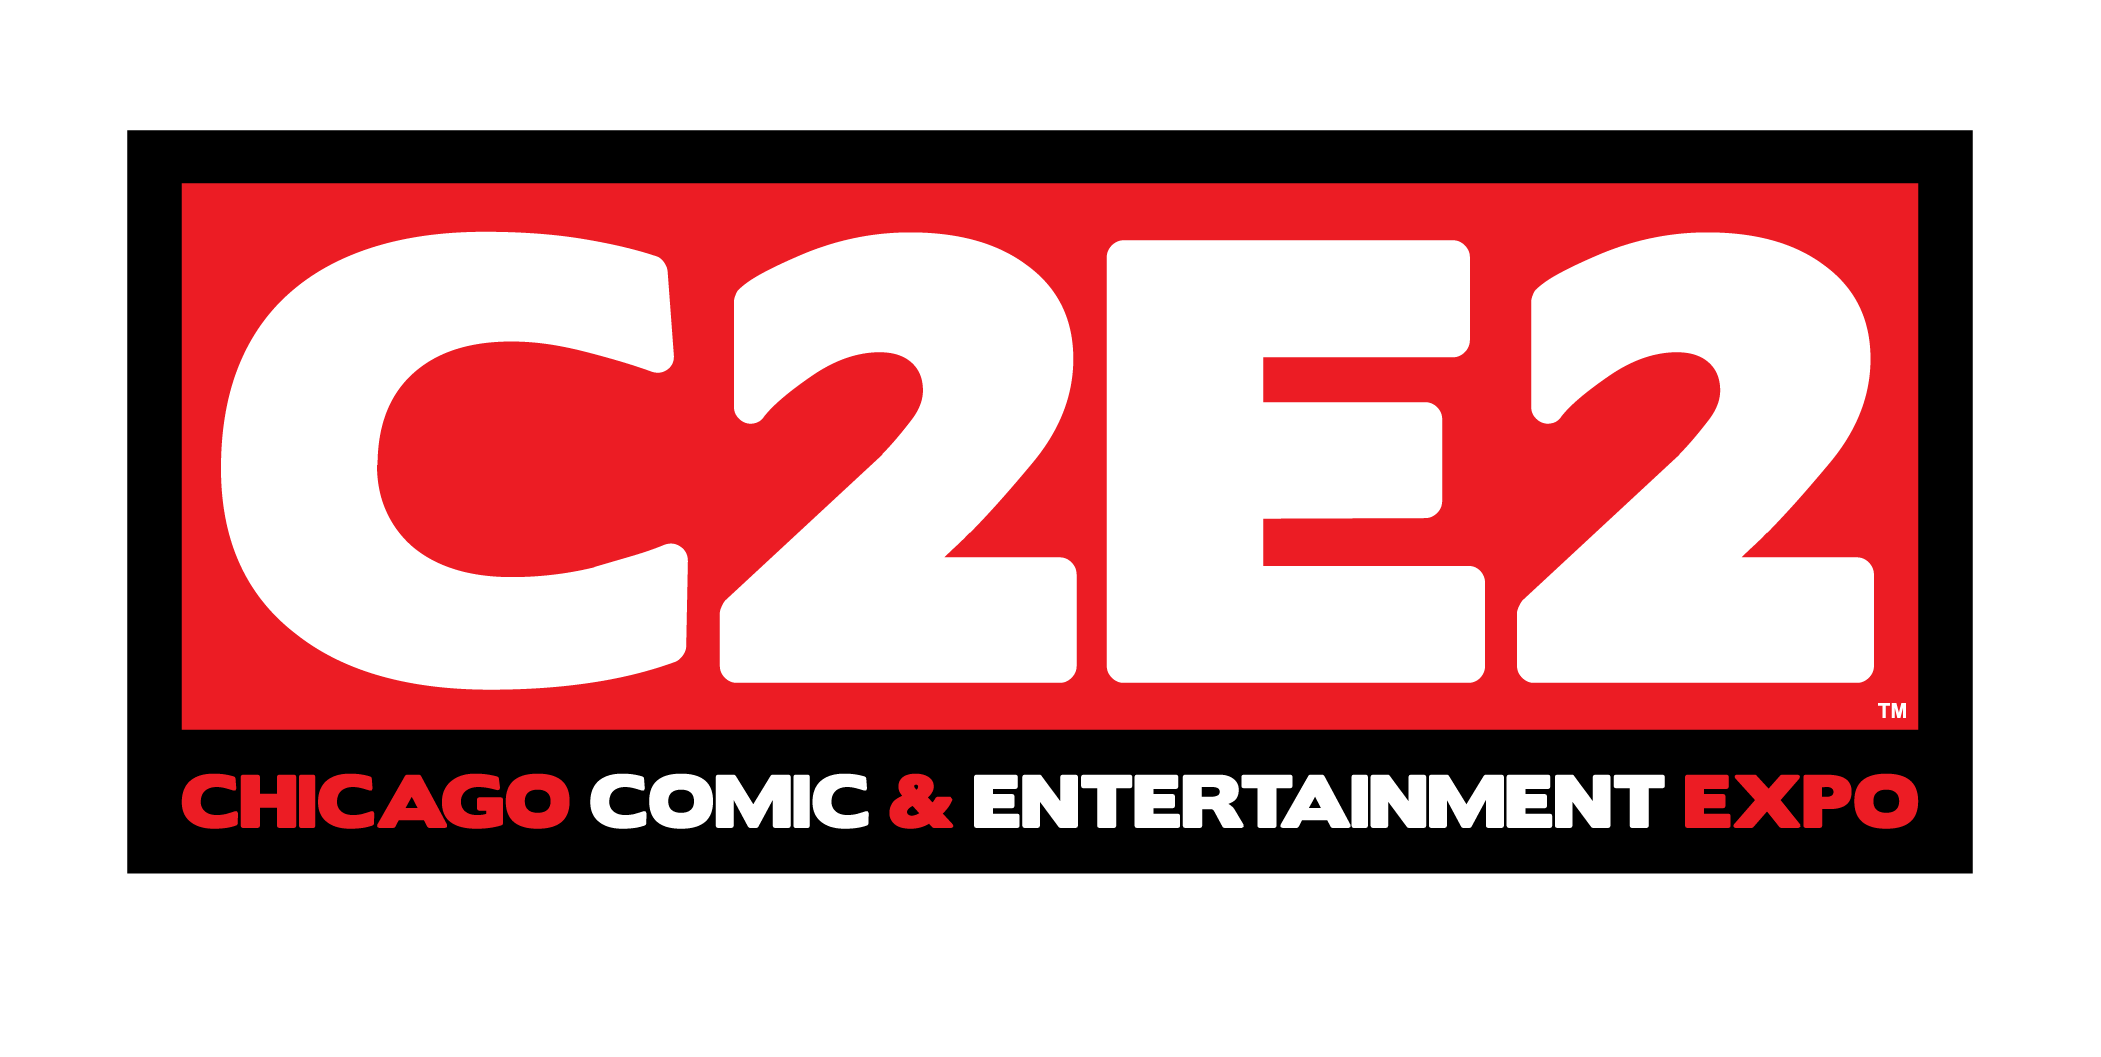  I’ll be attending C2E2 in Chicago, IL on April 28th 